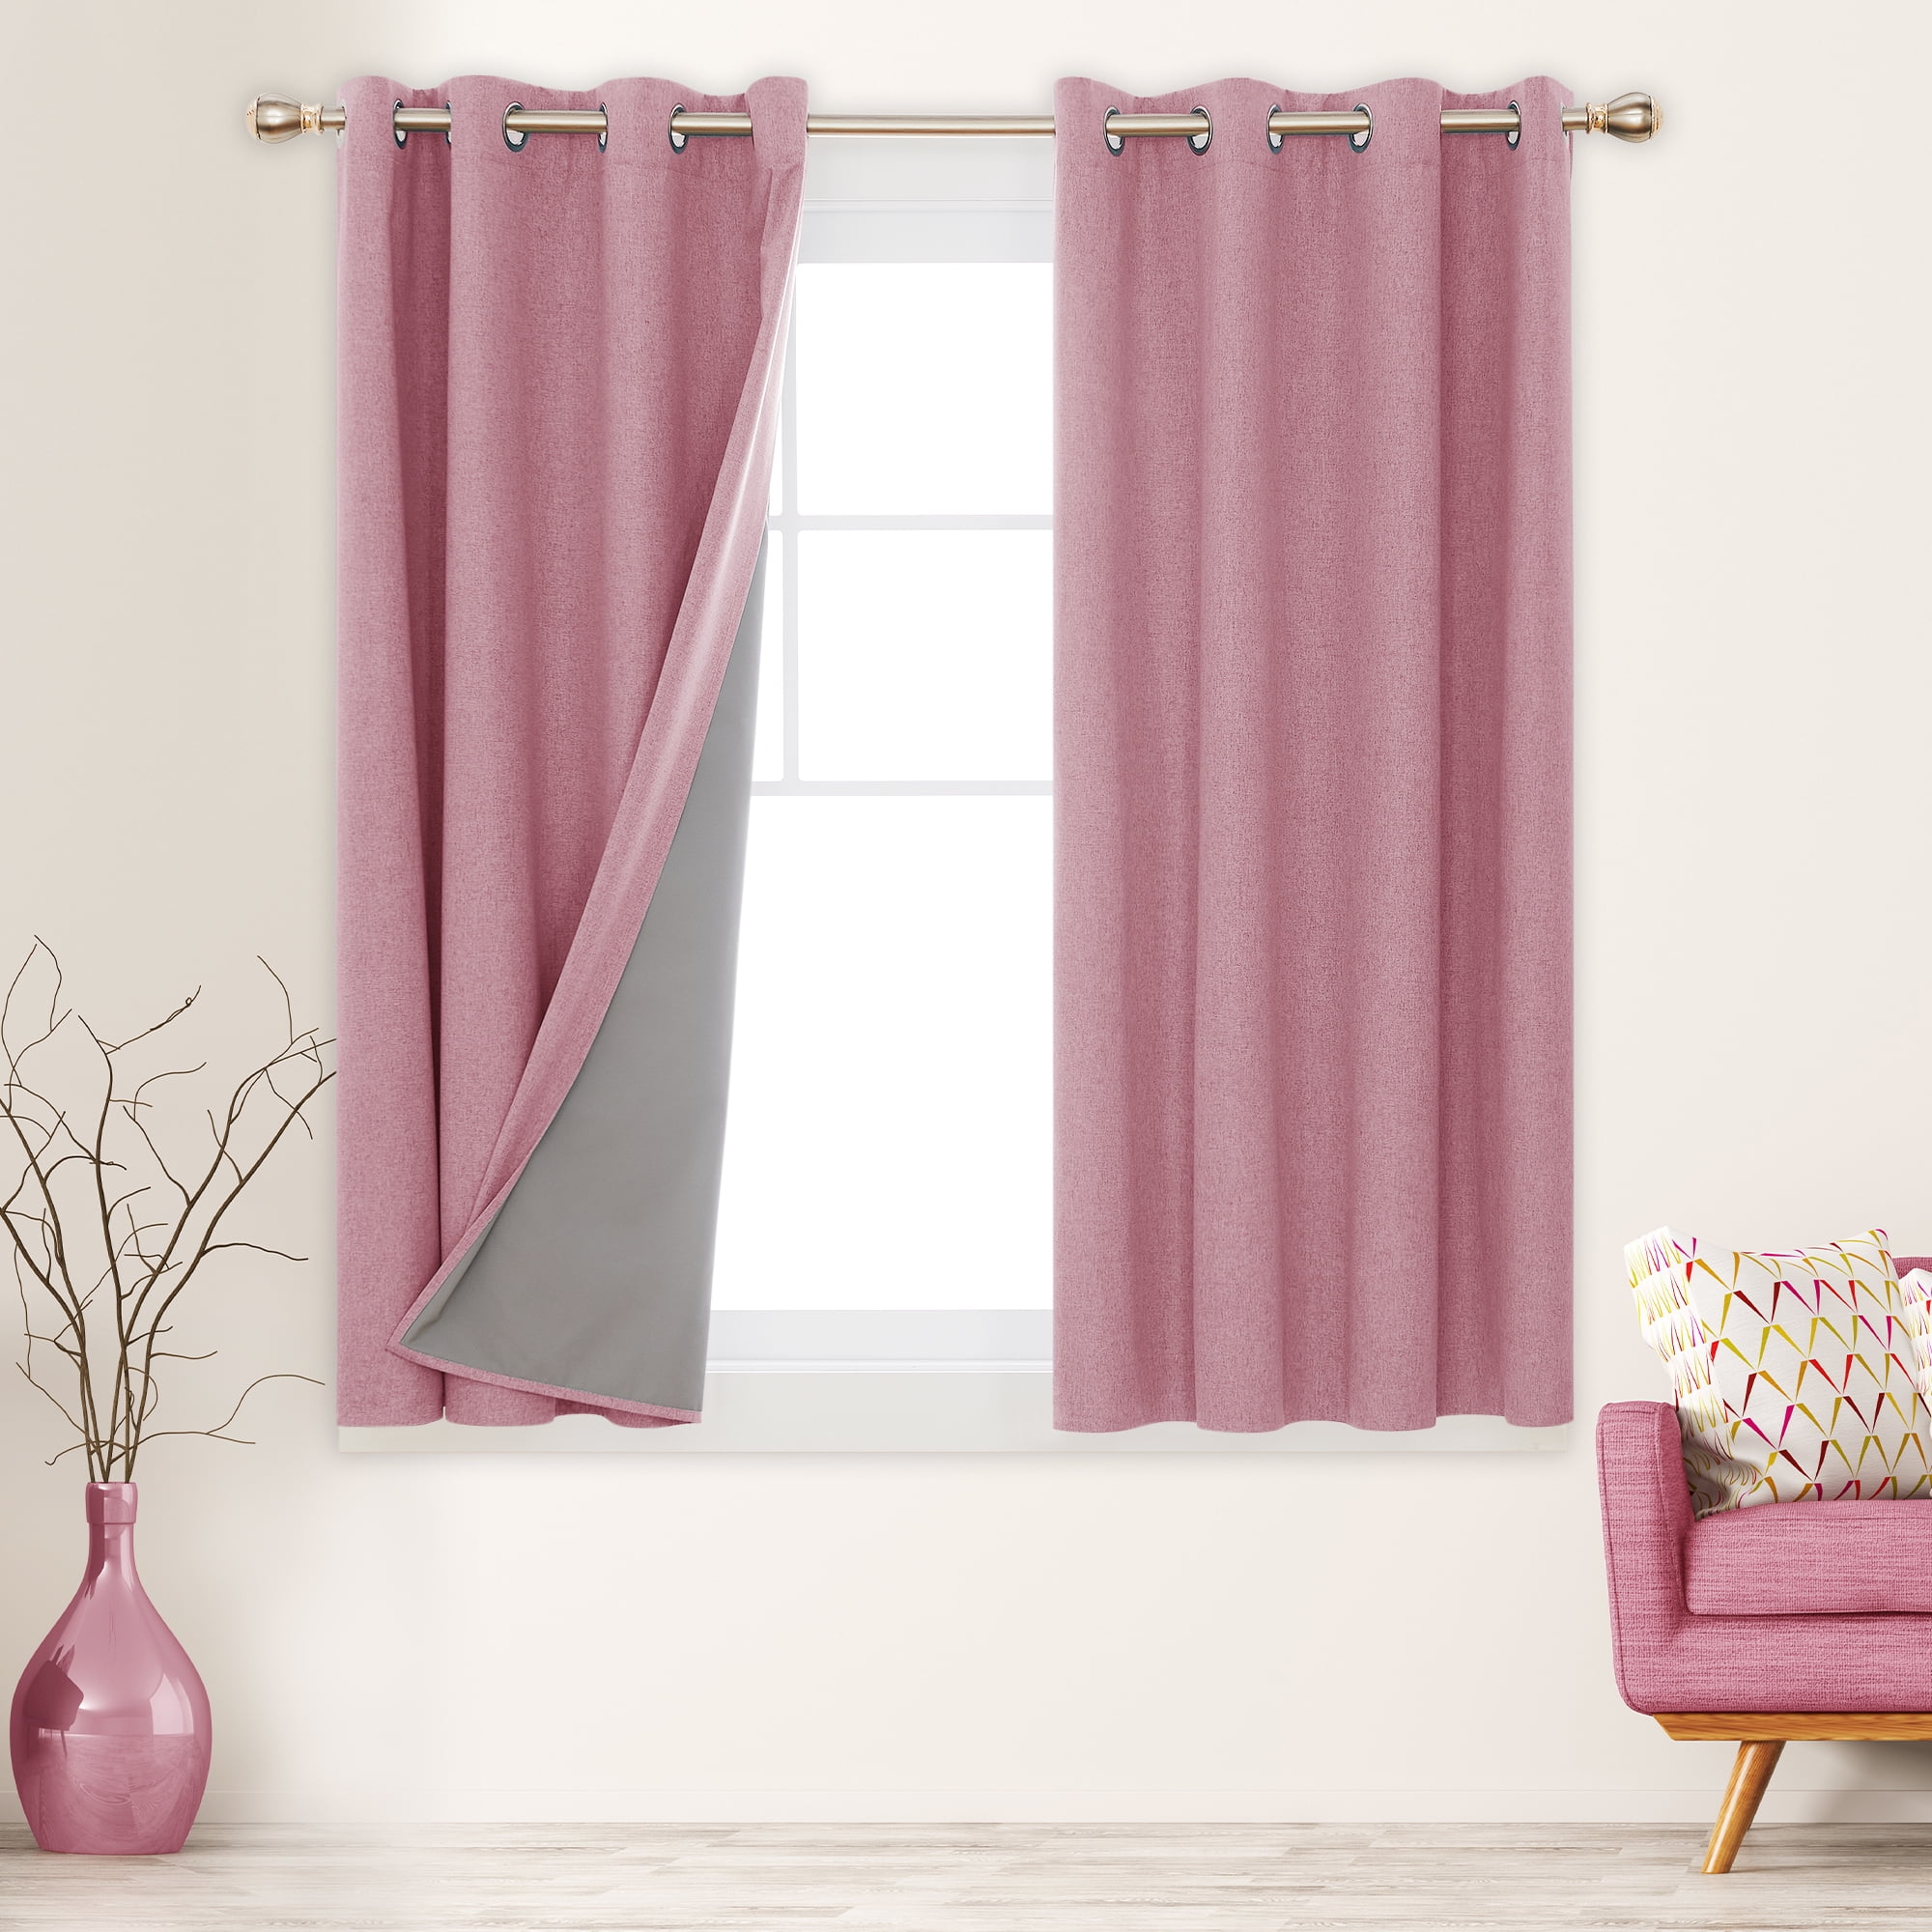 PINK 1PC PANEL GROMMET HEAVY THICK UNLINED 100% THERMAL BLACKOUT WINDOW CURTAIN 